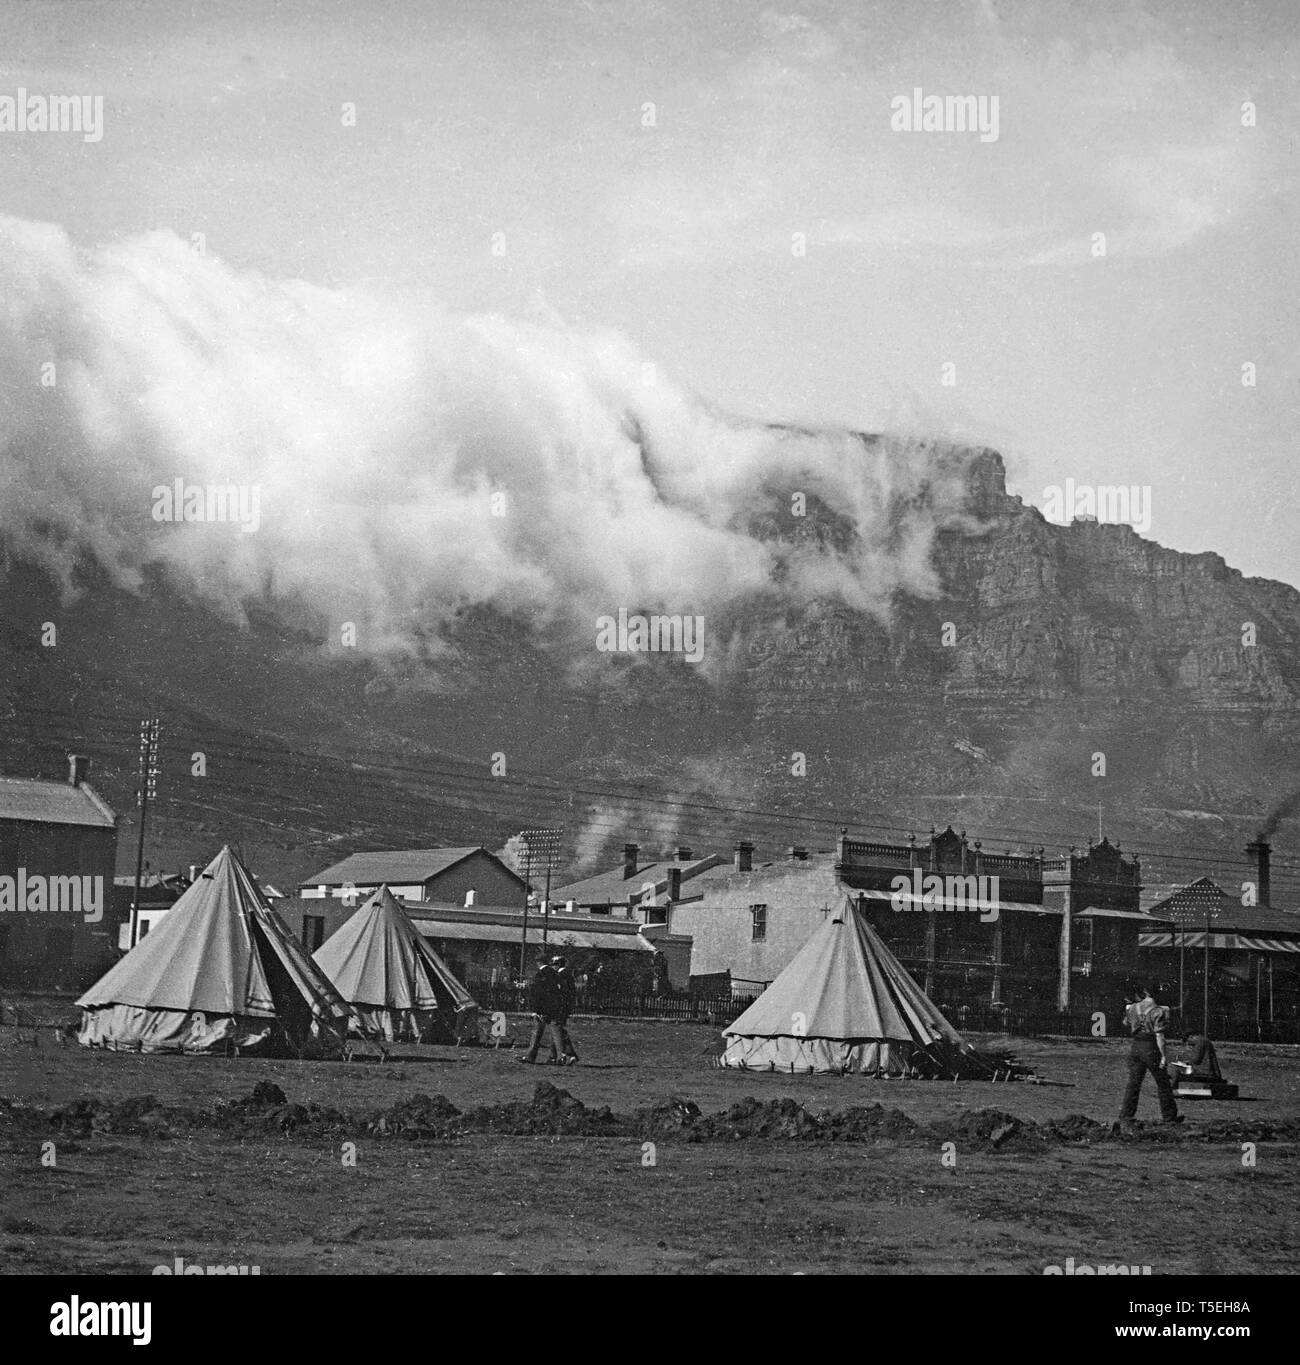 Photograph taken during the Boer War in Southern Africa, in what is now Cape Town. An encampment of British Soldiers, with Table Mountain in the background. Stock Photo